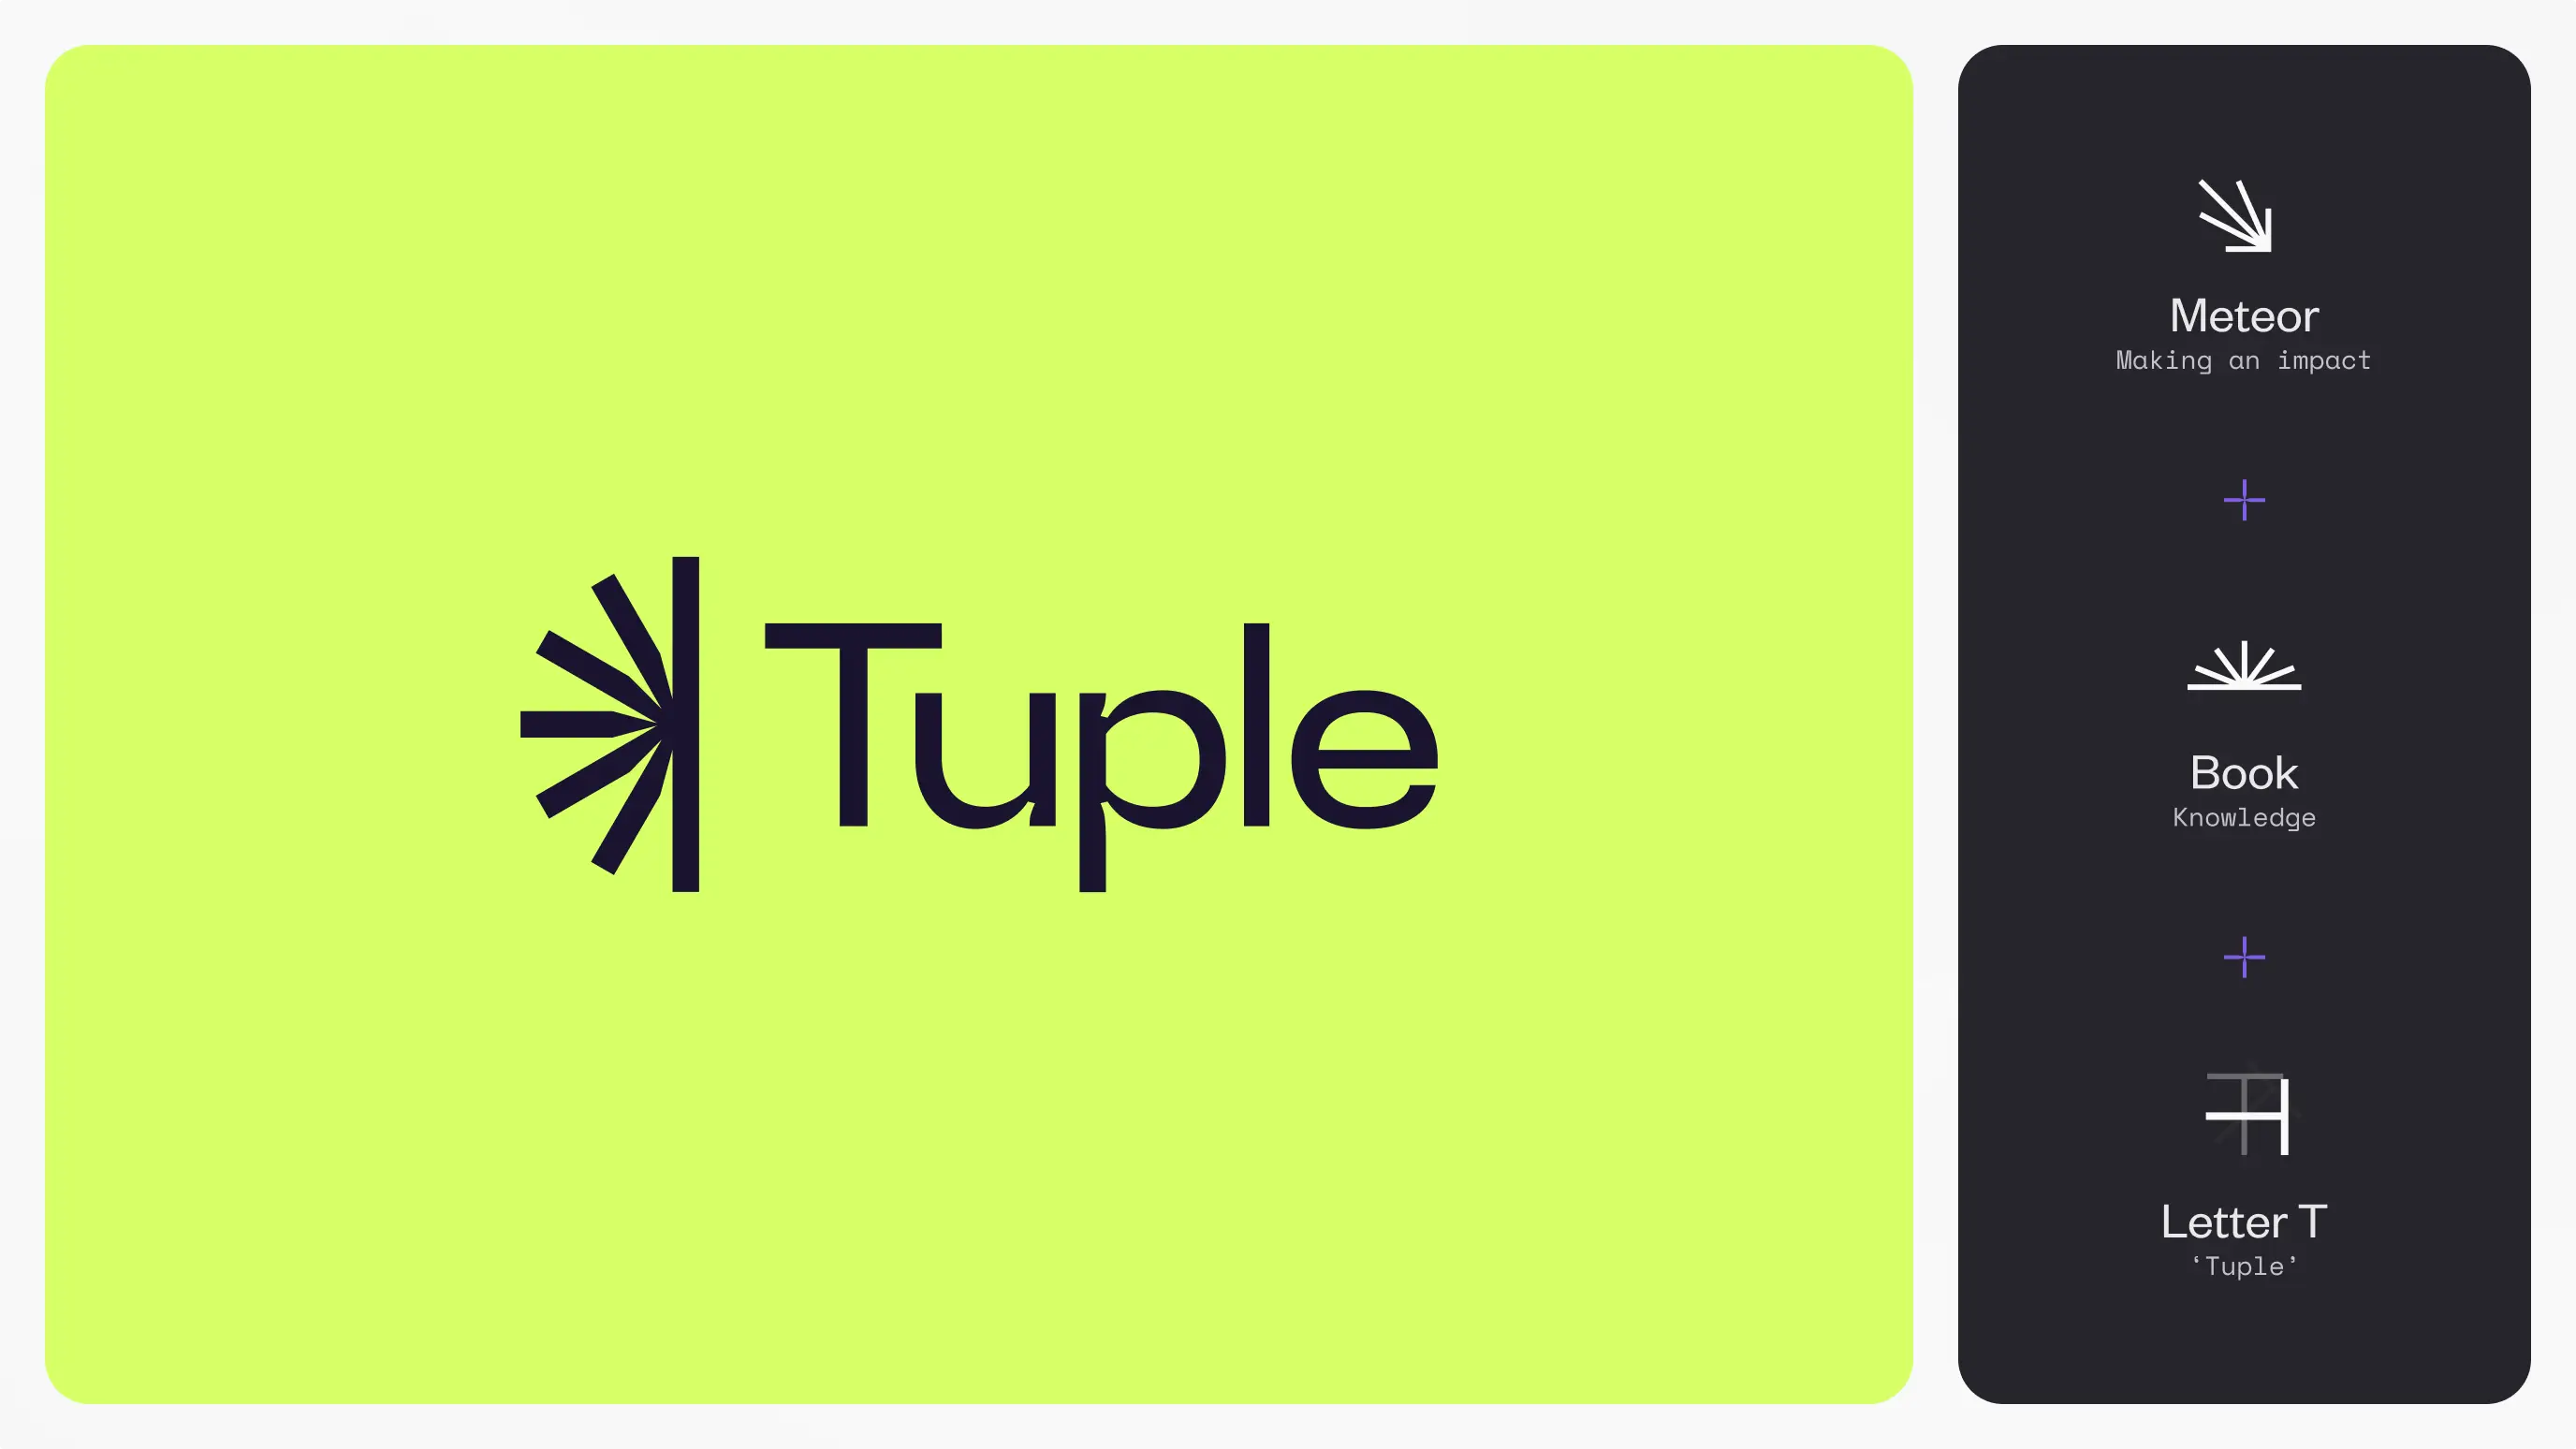 Two rounded rectangles that displays the logo we've made for Tuple and the explanation of the logo mark